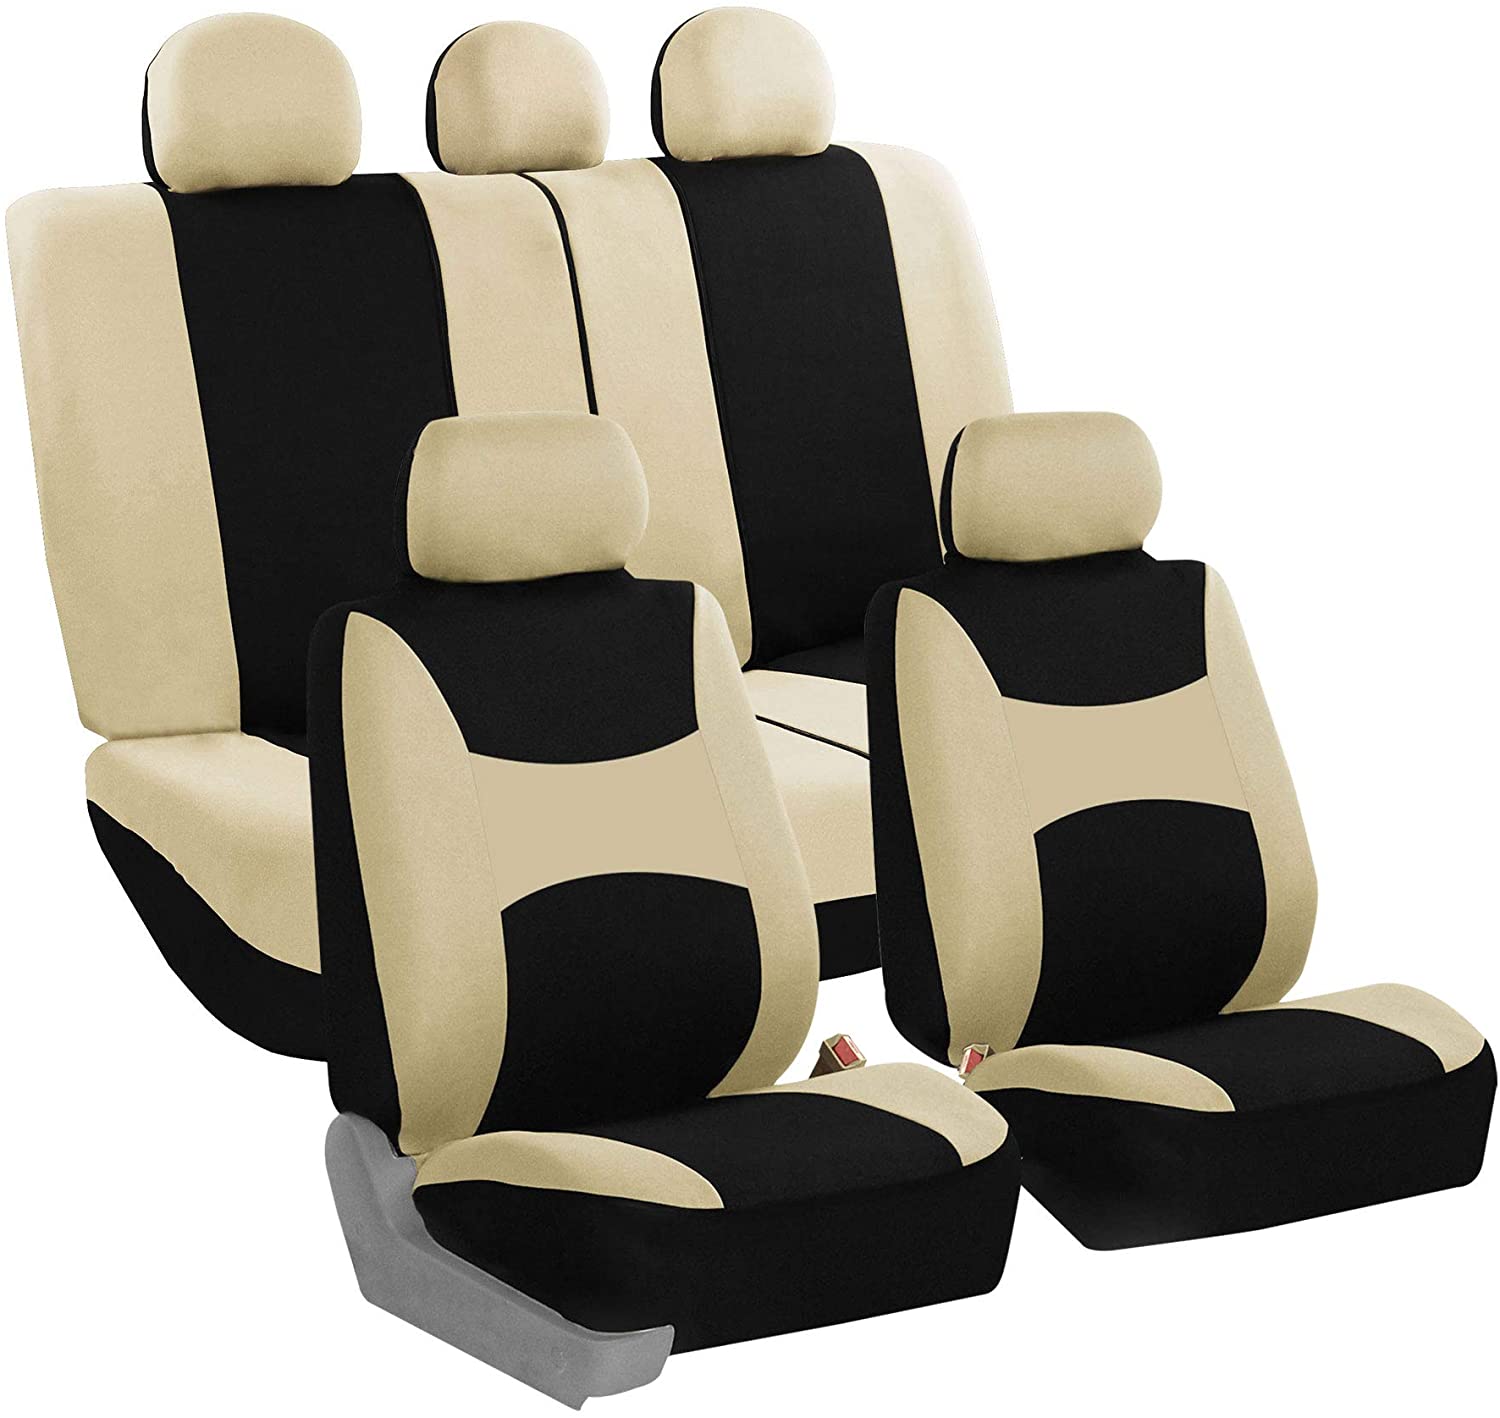 10 Best Seat Covers For Nissan Rogue Wonderful Engineering